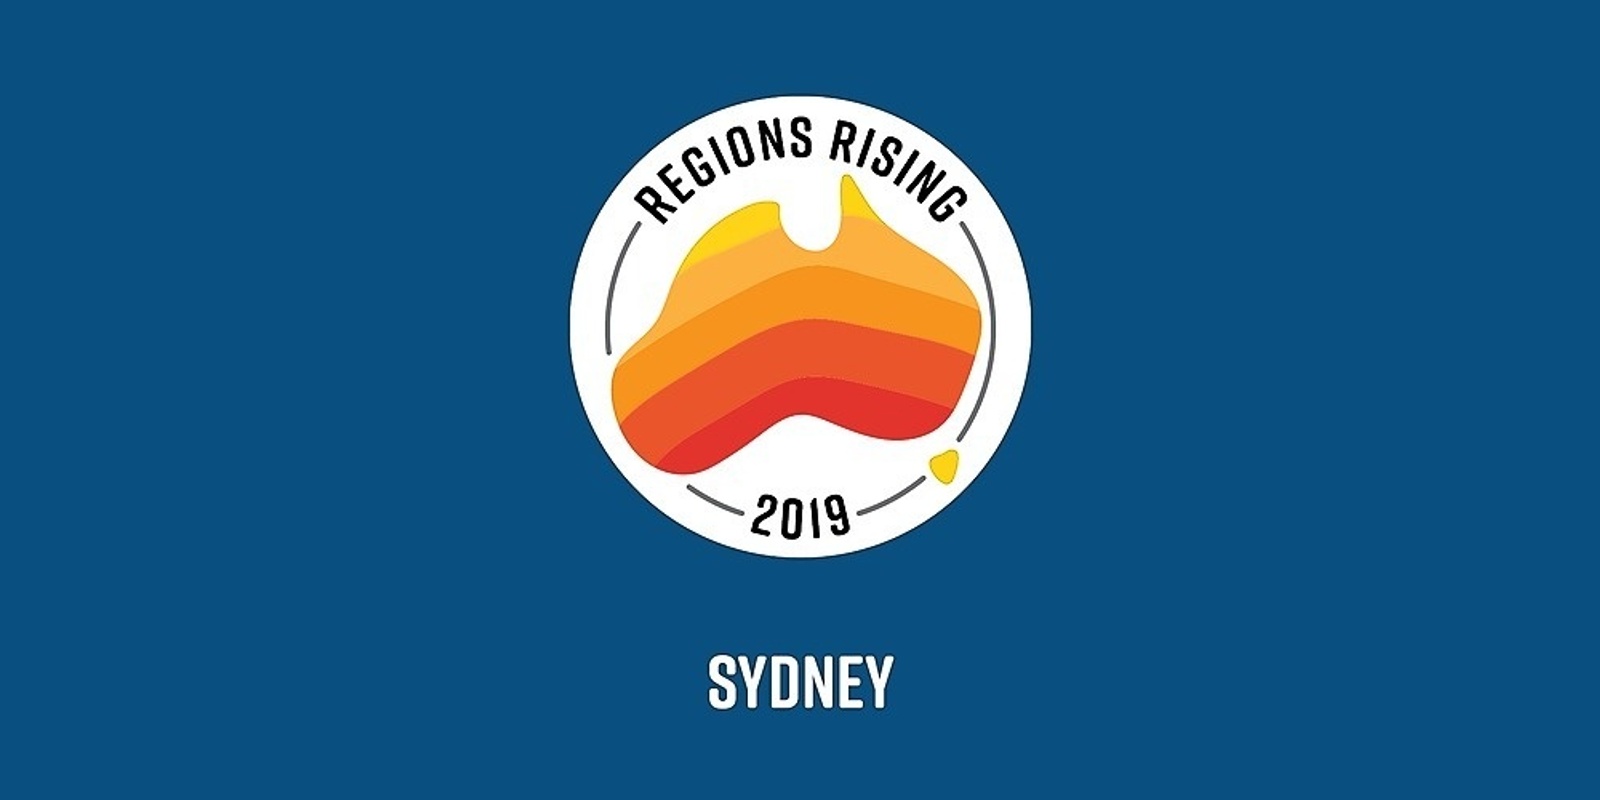 Banner image for Regions Rising NSW